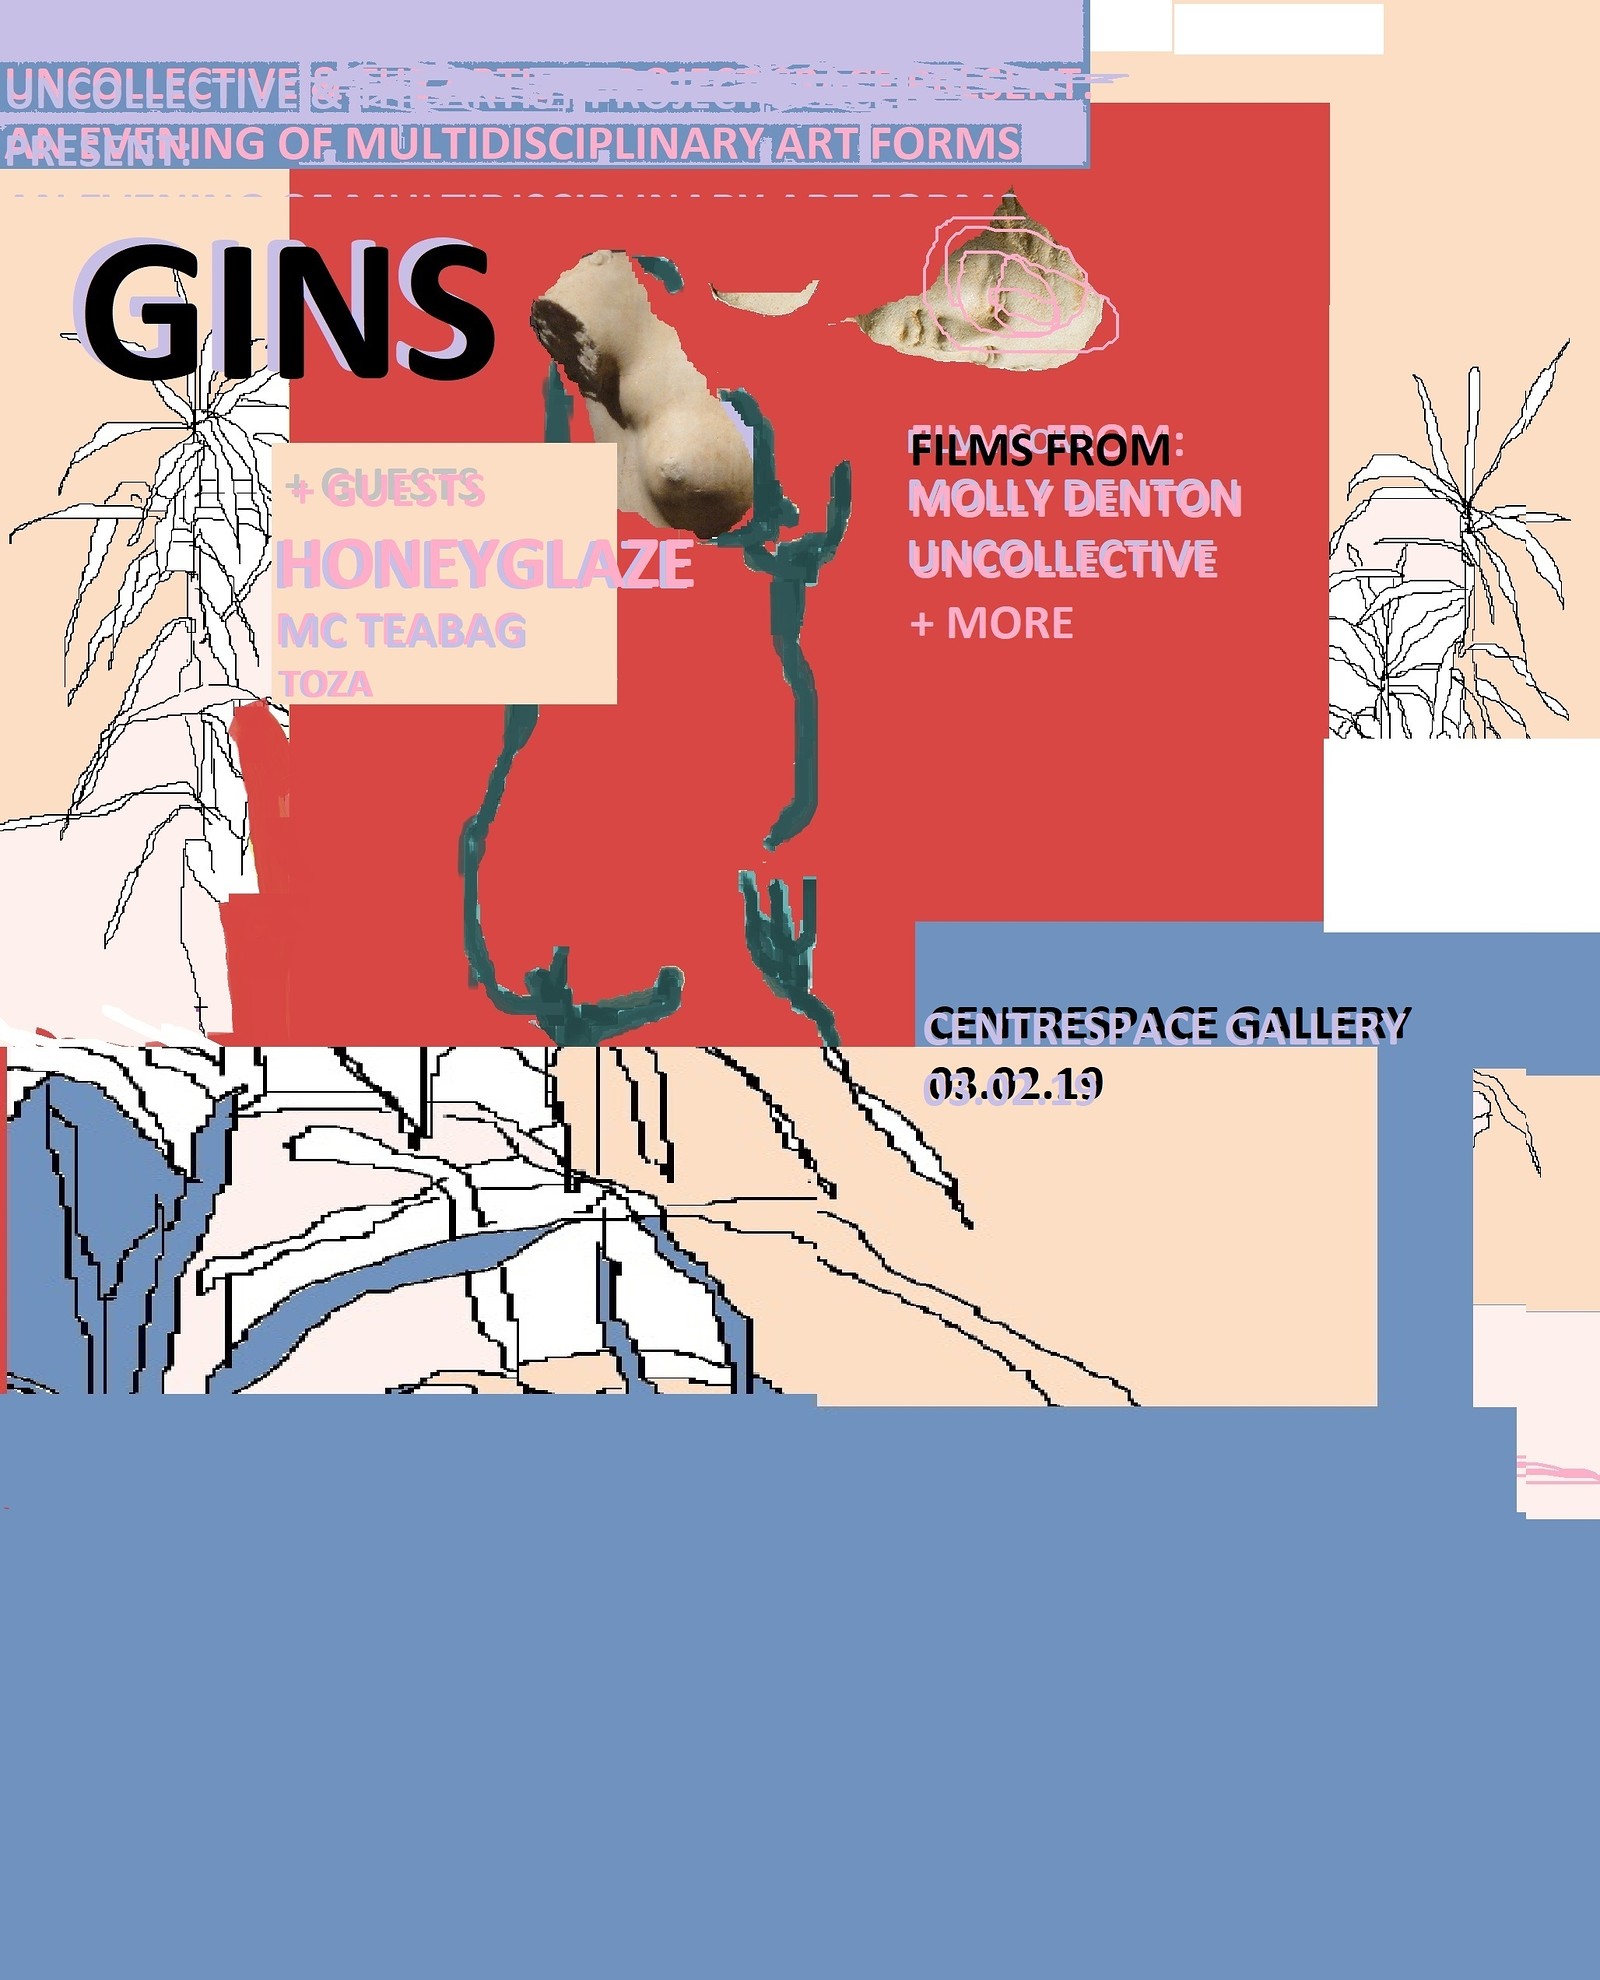 An Evening With GINS at Centrespace Gallery